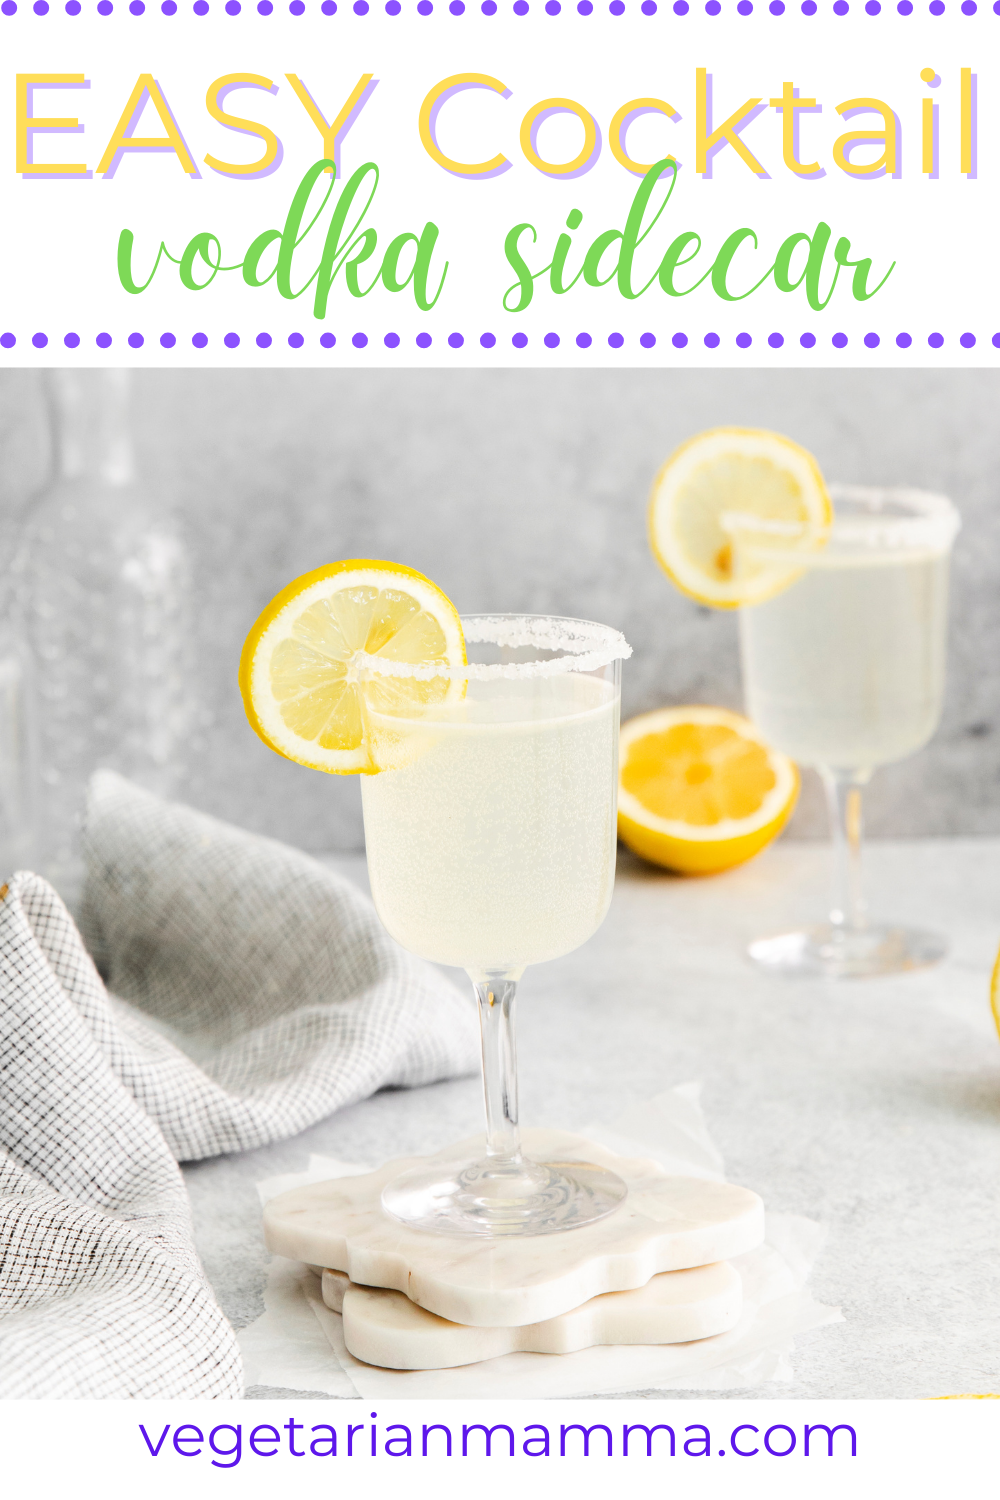 This vodka sidecar is bright and refreshing with a strong citrus flavor and a hint of sweetness from the sugar rim. Be careful–this drink packs a punch!